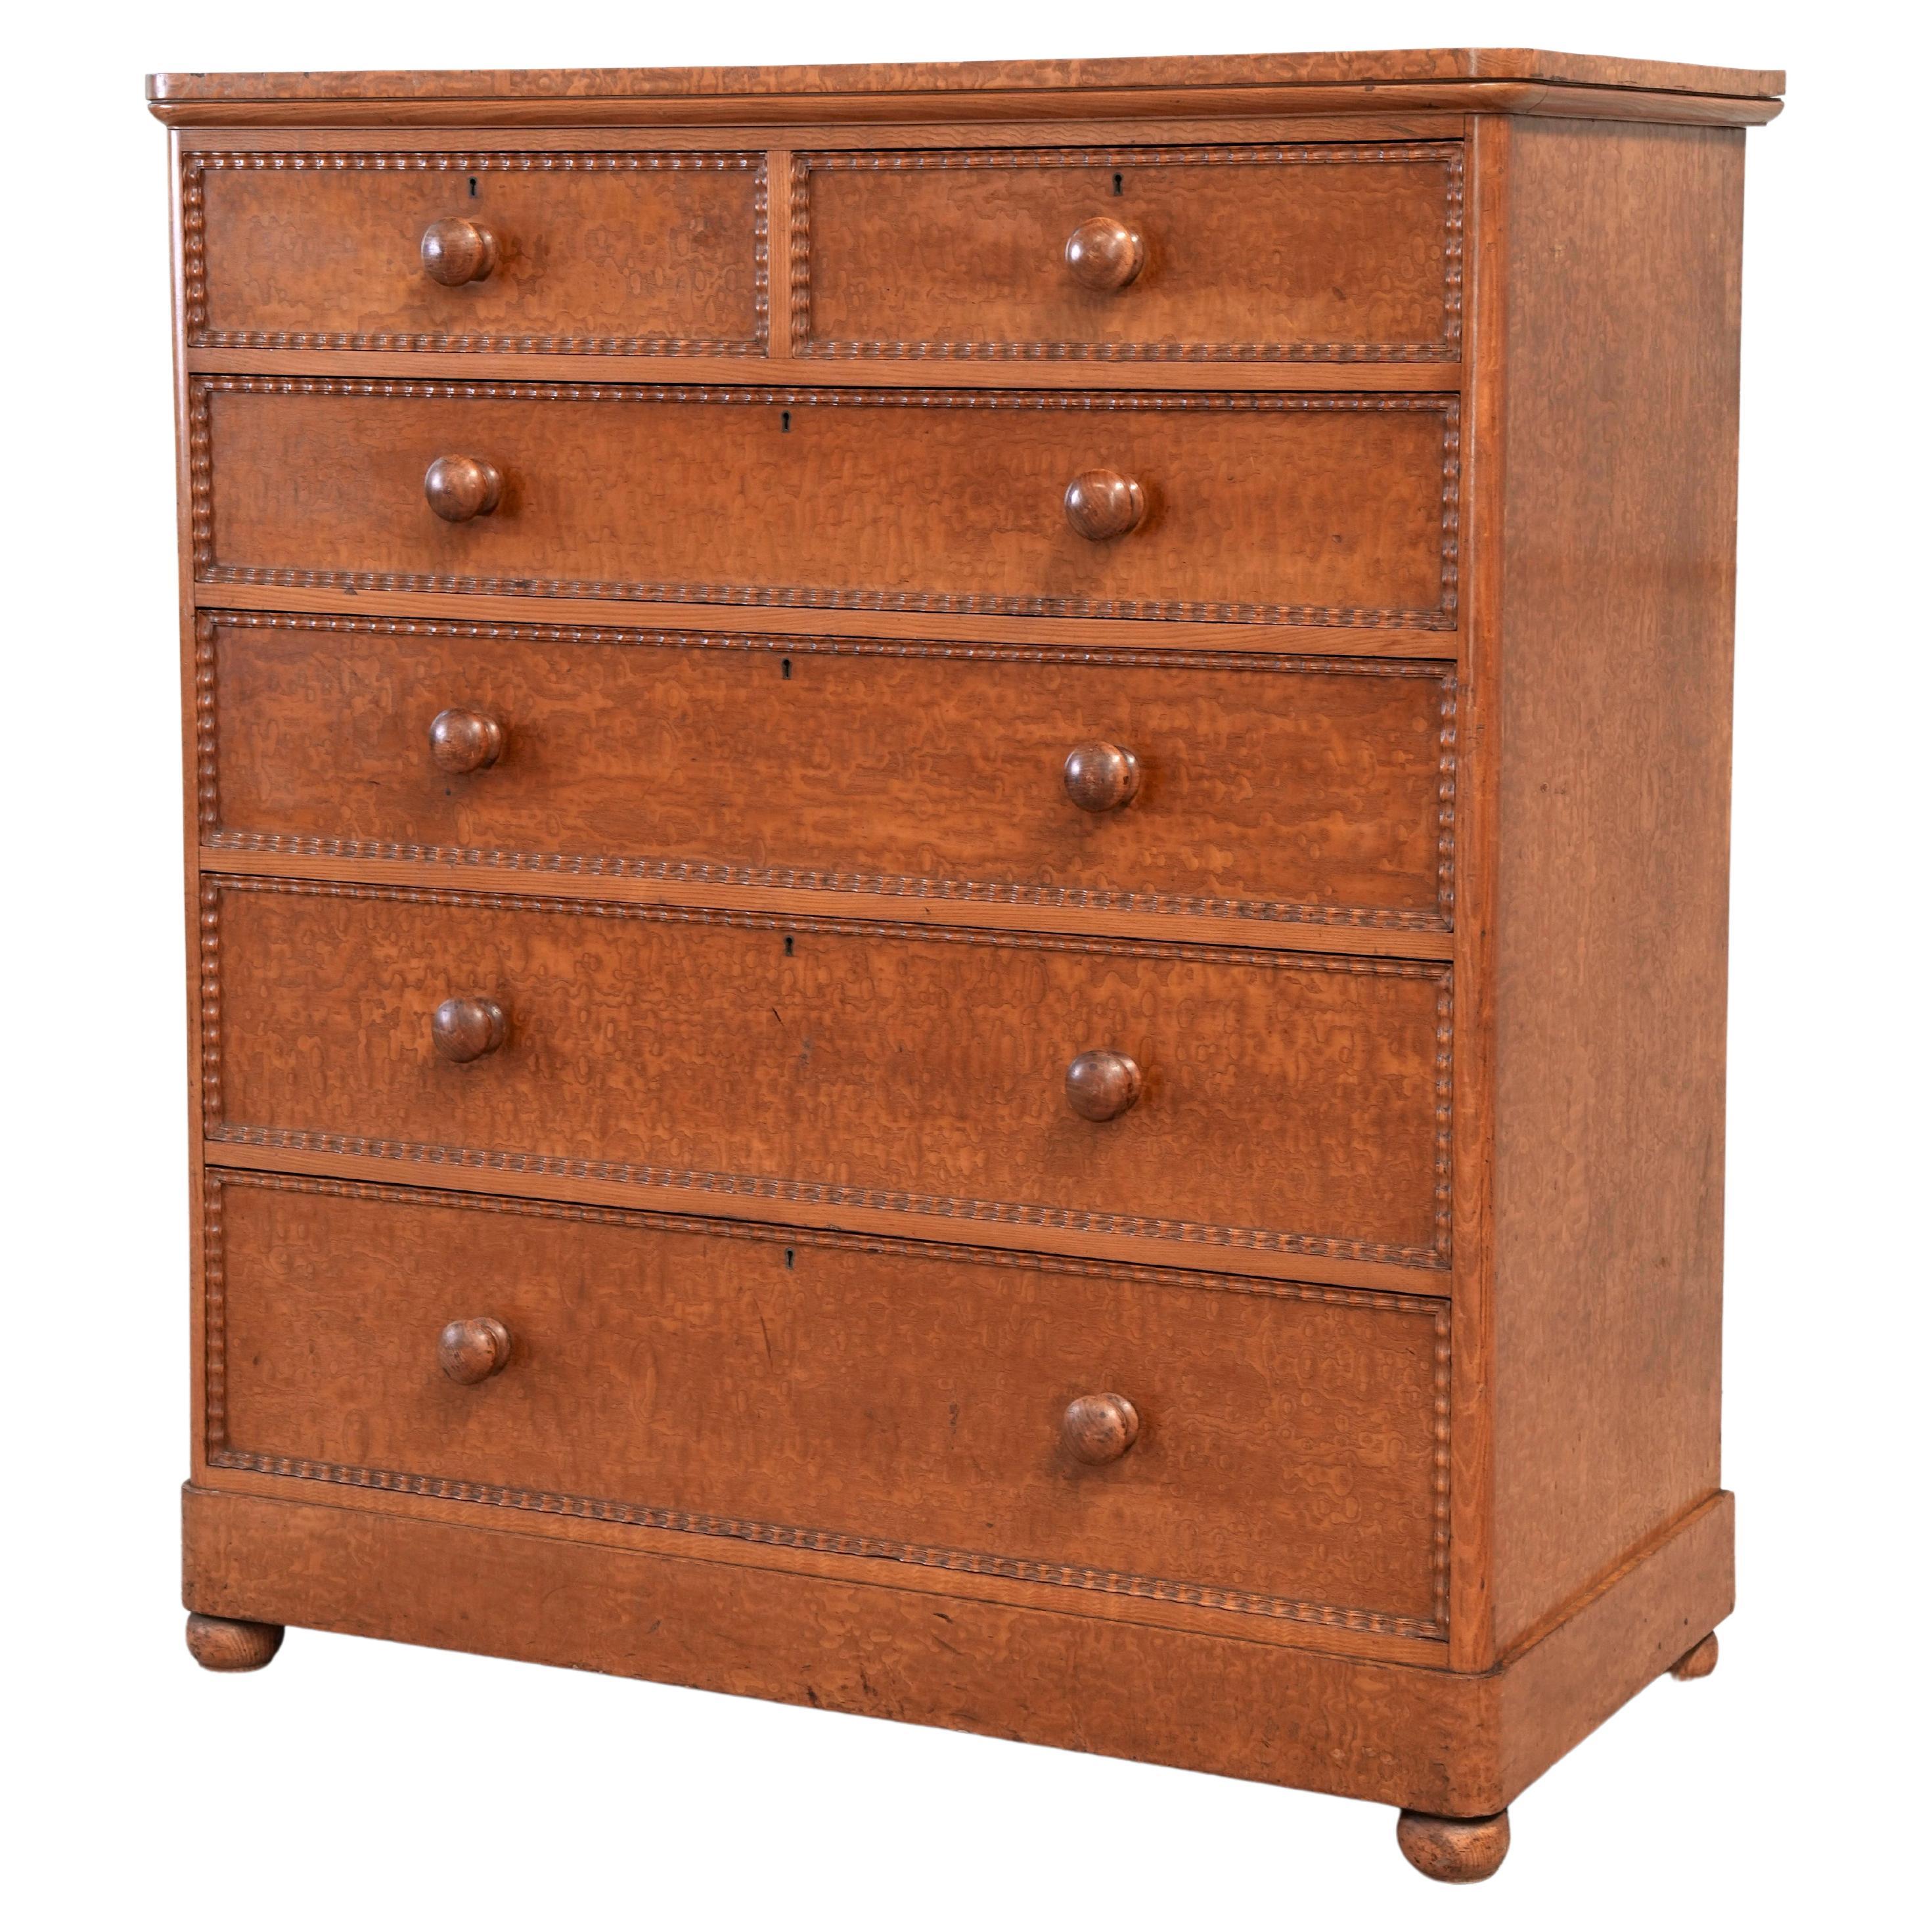 19th Century Burr Ash Chest of Drawers